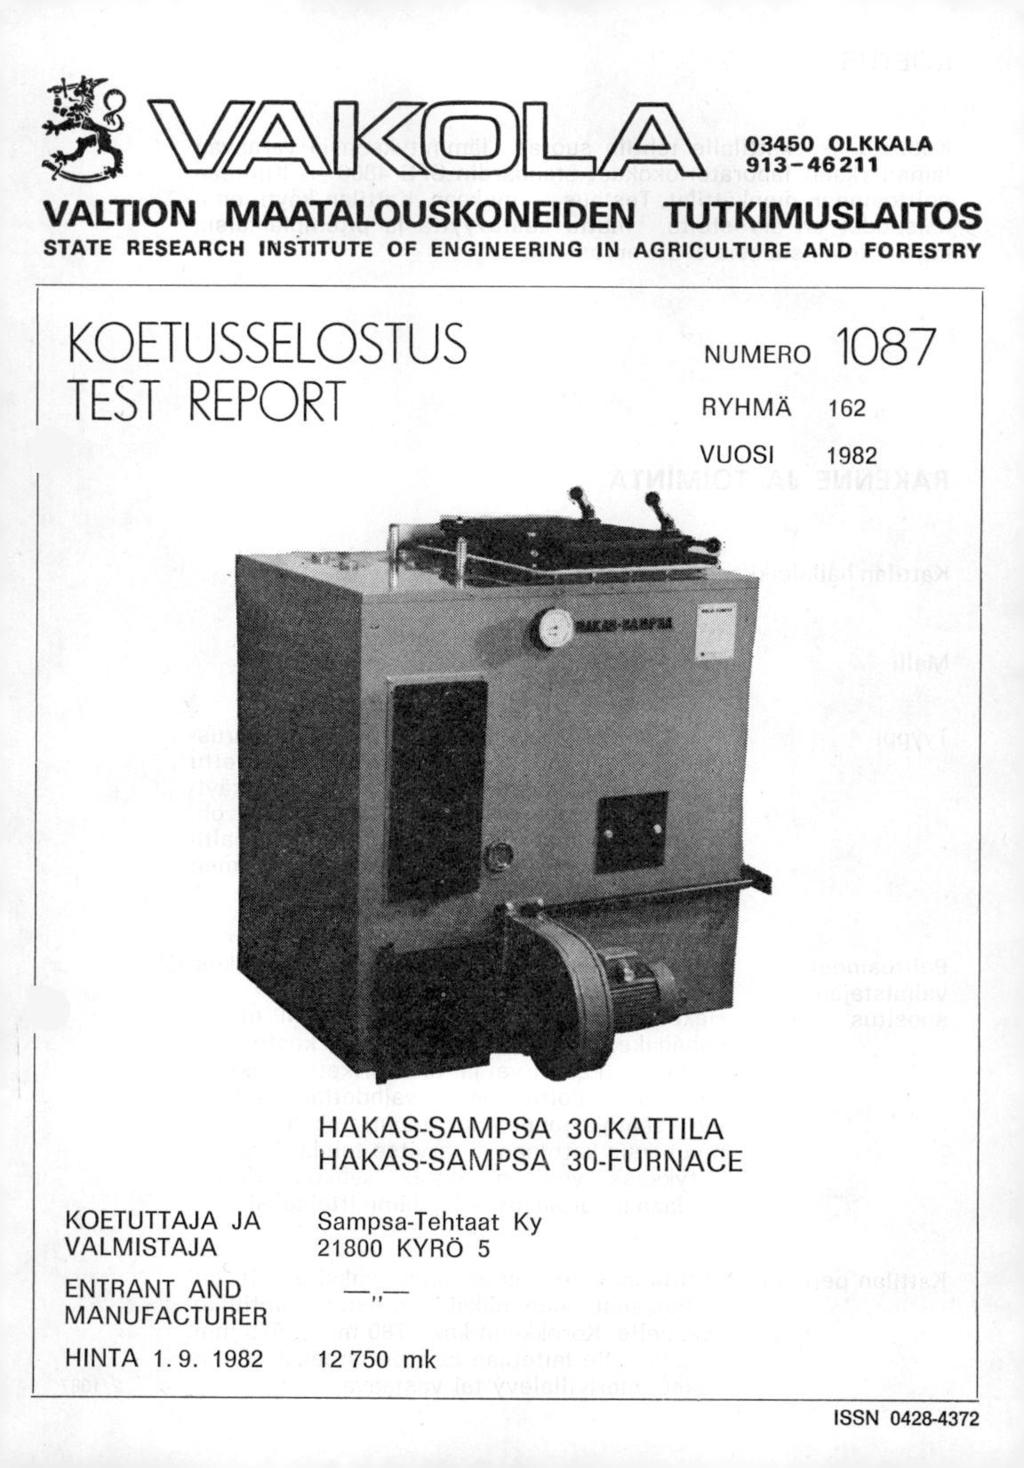 W[A-\1110EnJ 03450 OLKKALA 913 46 211 VALTION MAATALOUSKONEIDEN TUTKIMUSLAITOS STATE RESEARCH INSTITUTE OF ENGINEERING IN AGRICULTURE AND FORESTRY <OETUSSELOSTUS TEST REPORT NUMERO 1087